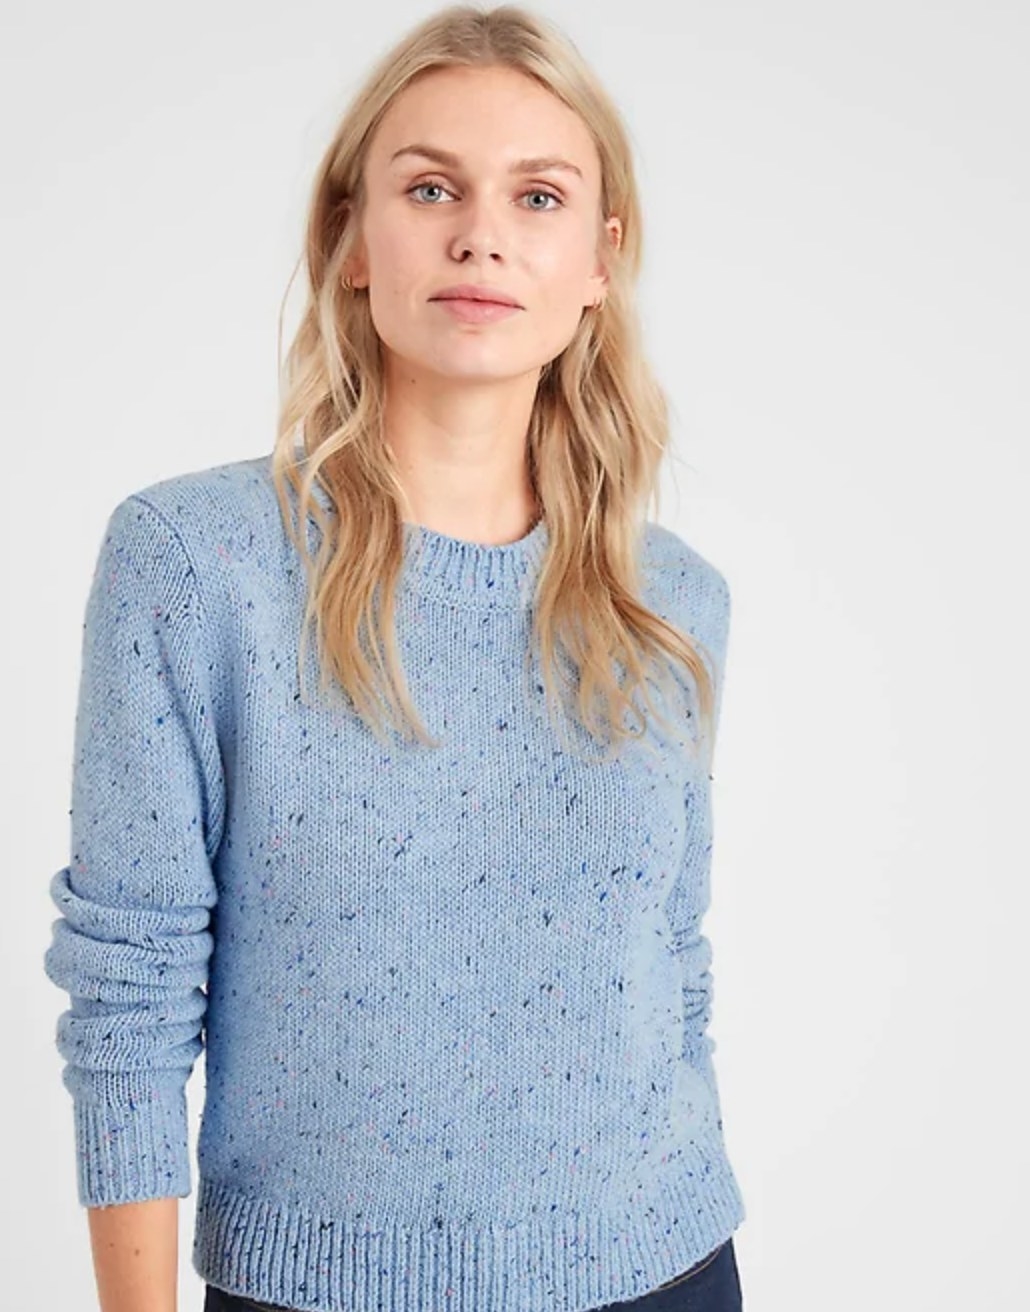 The crew neck sweater in blue